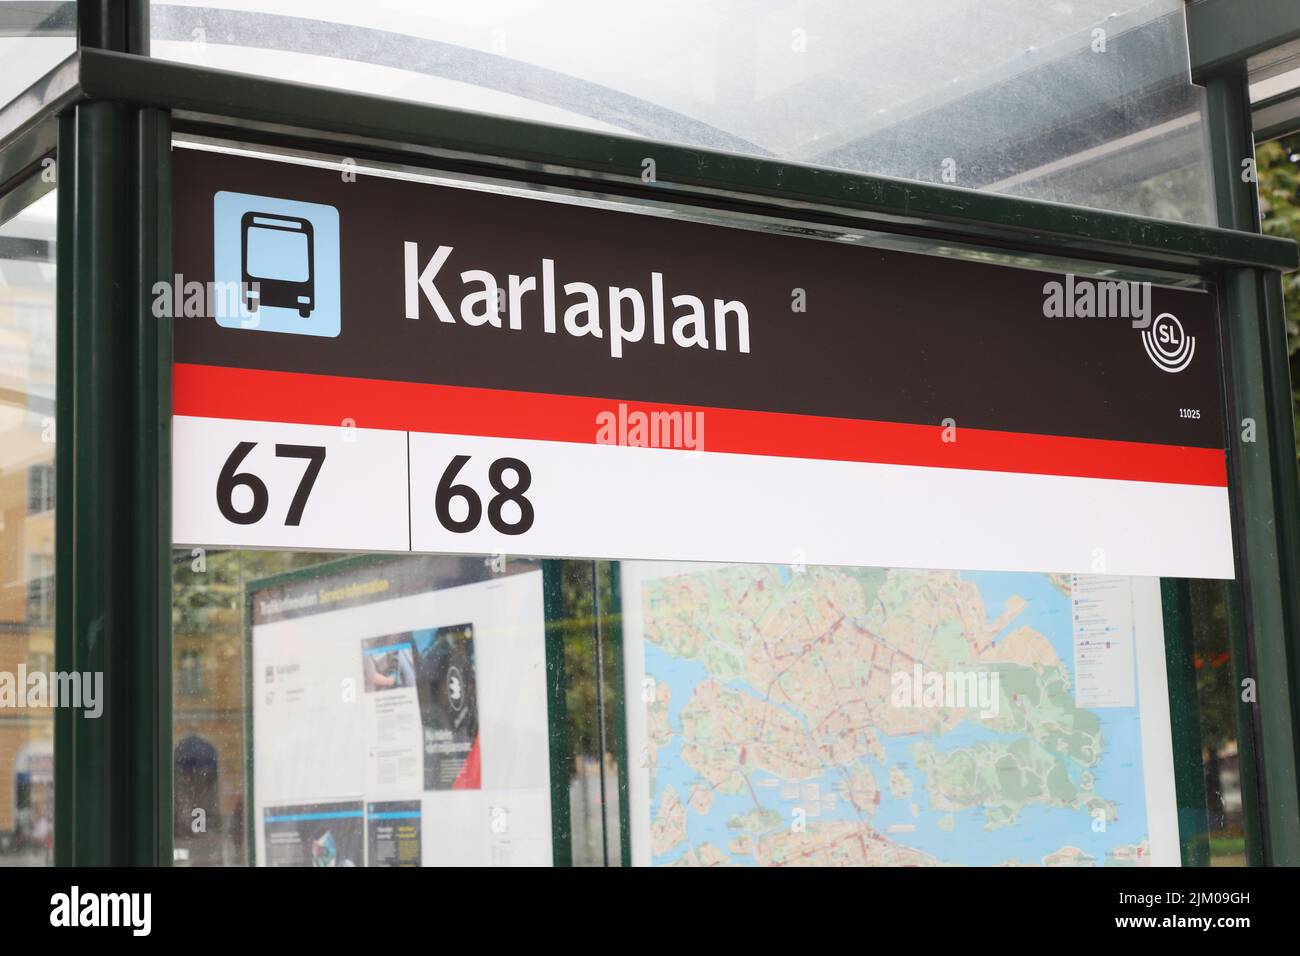 Stockholm, Sweden - September 1, 2021: Close-up view of the Karlsplan bus stop shelter in service for the lines 67 an 68. Stock Photo